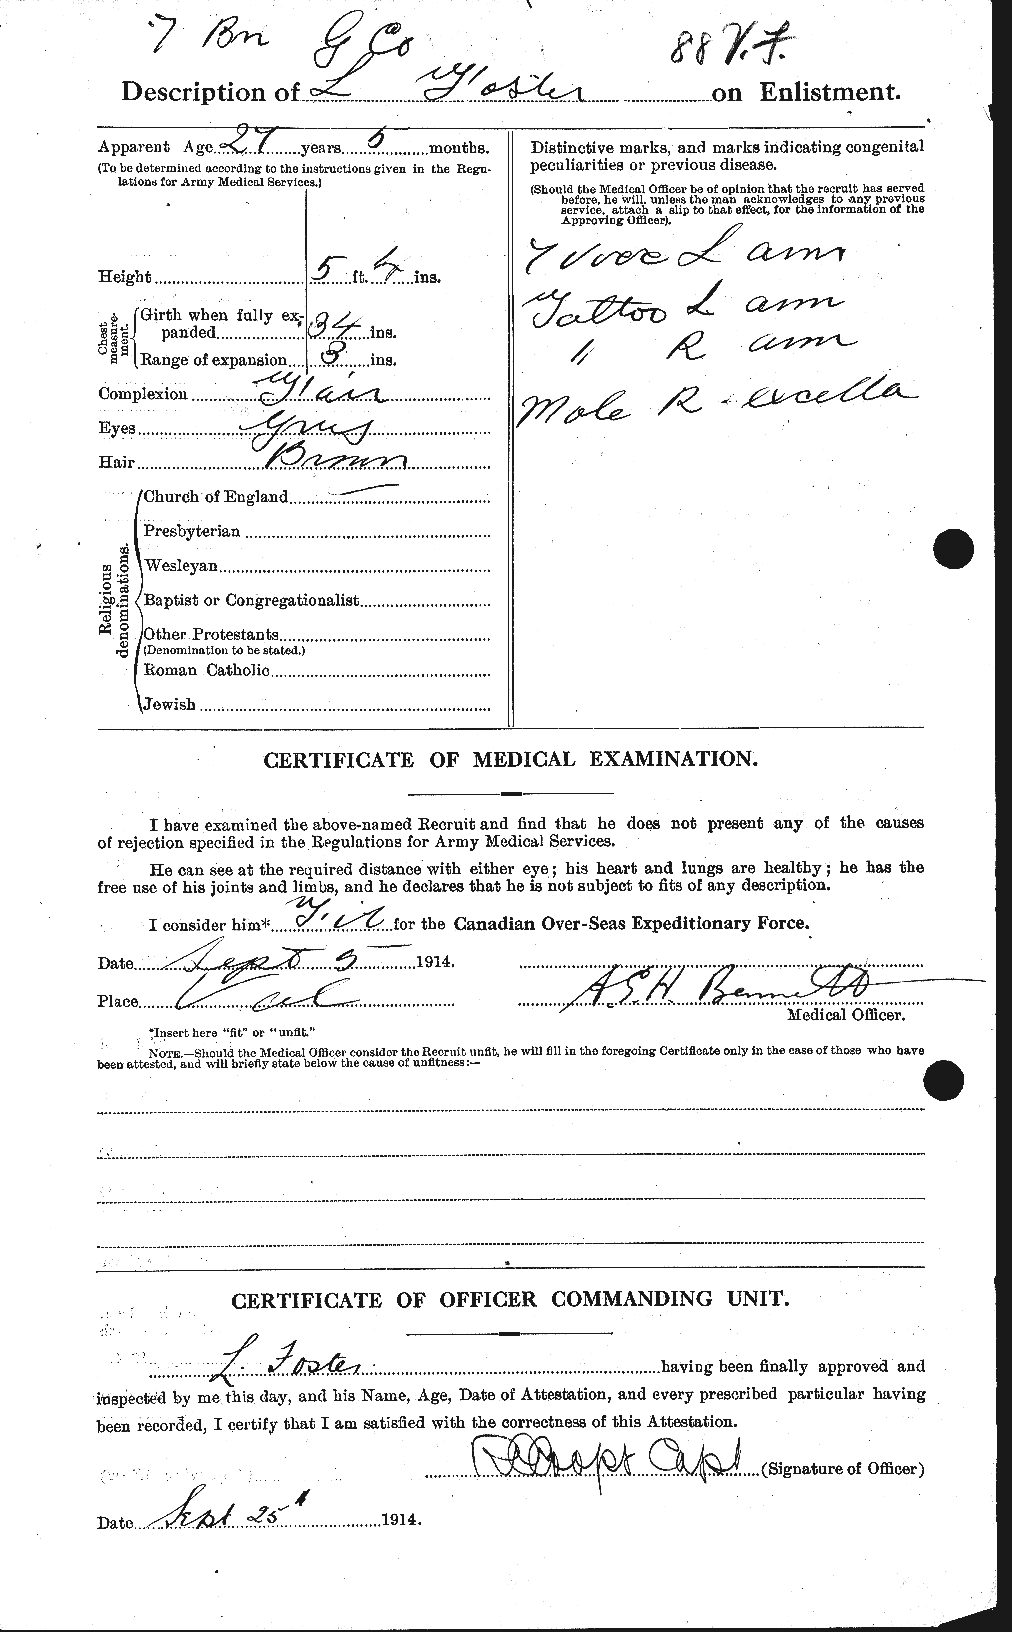 Personnel Records of the First World War - CEF 333403b